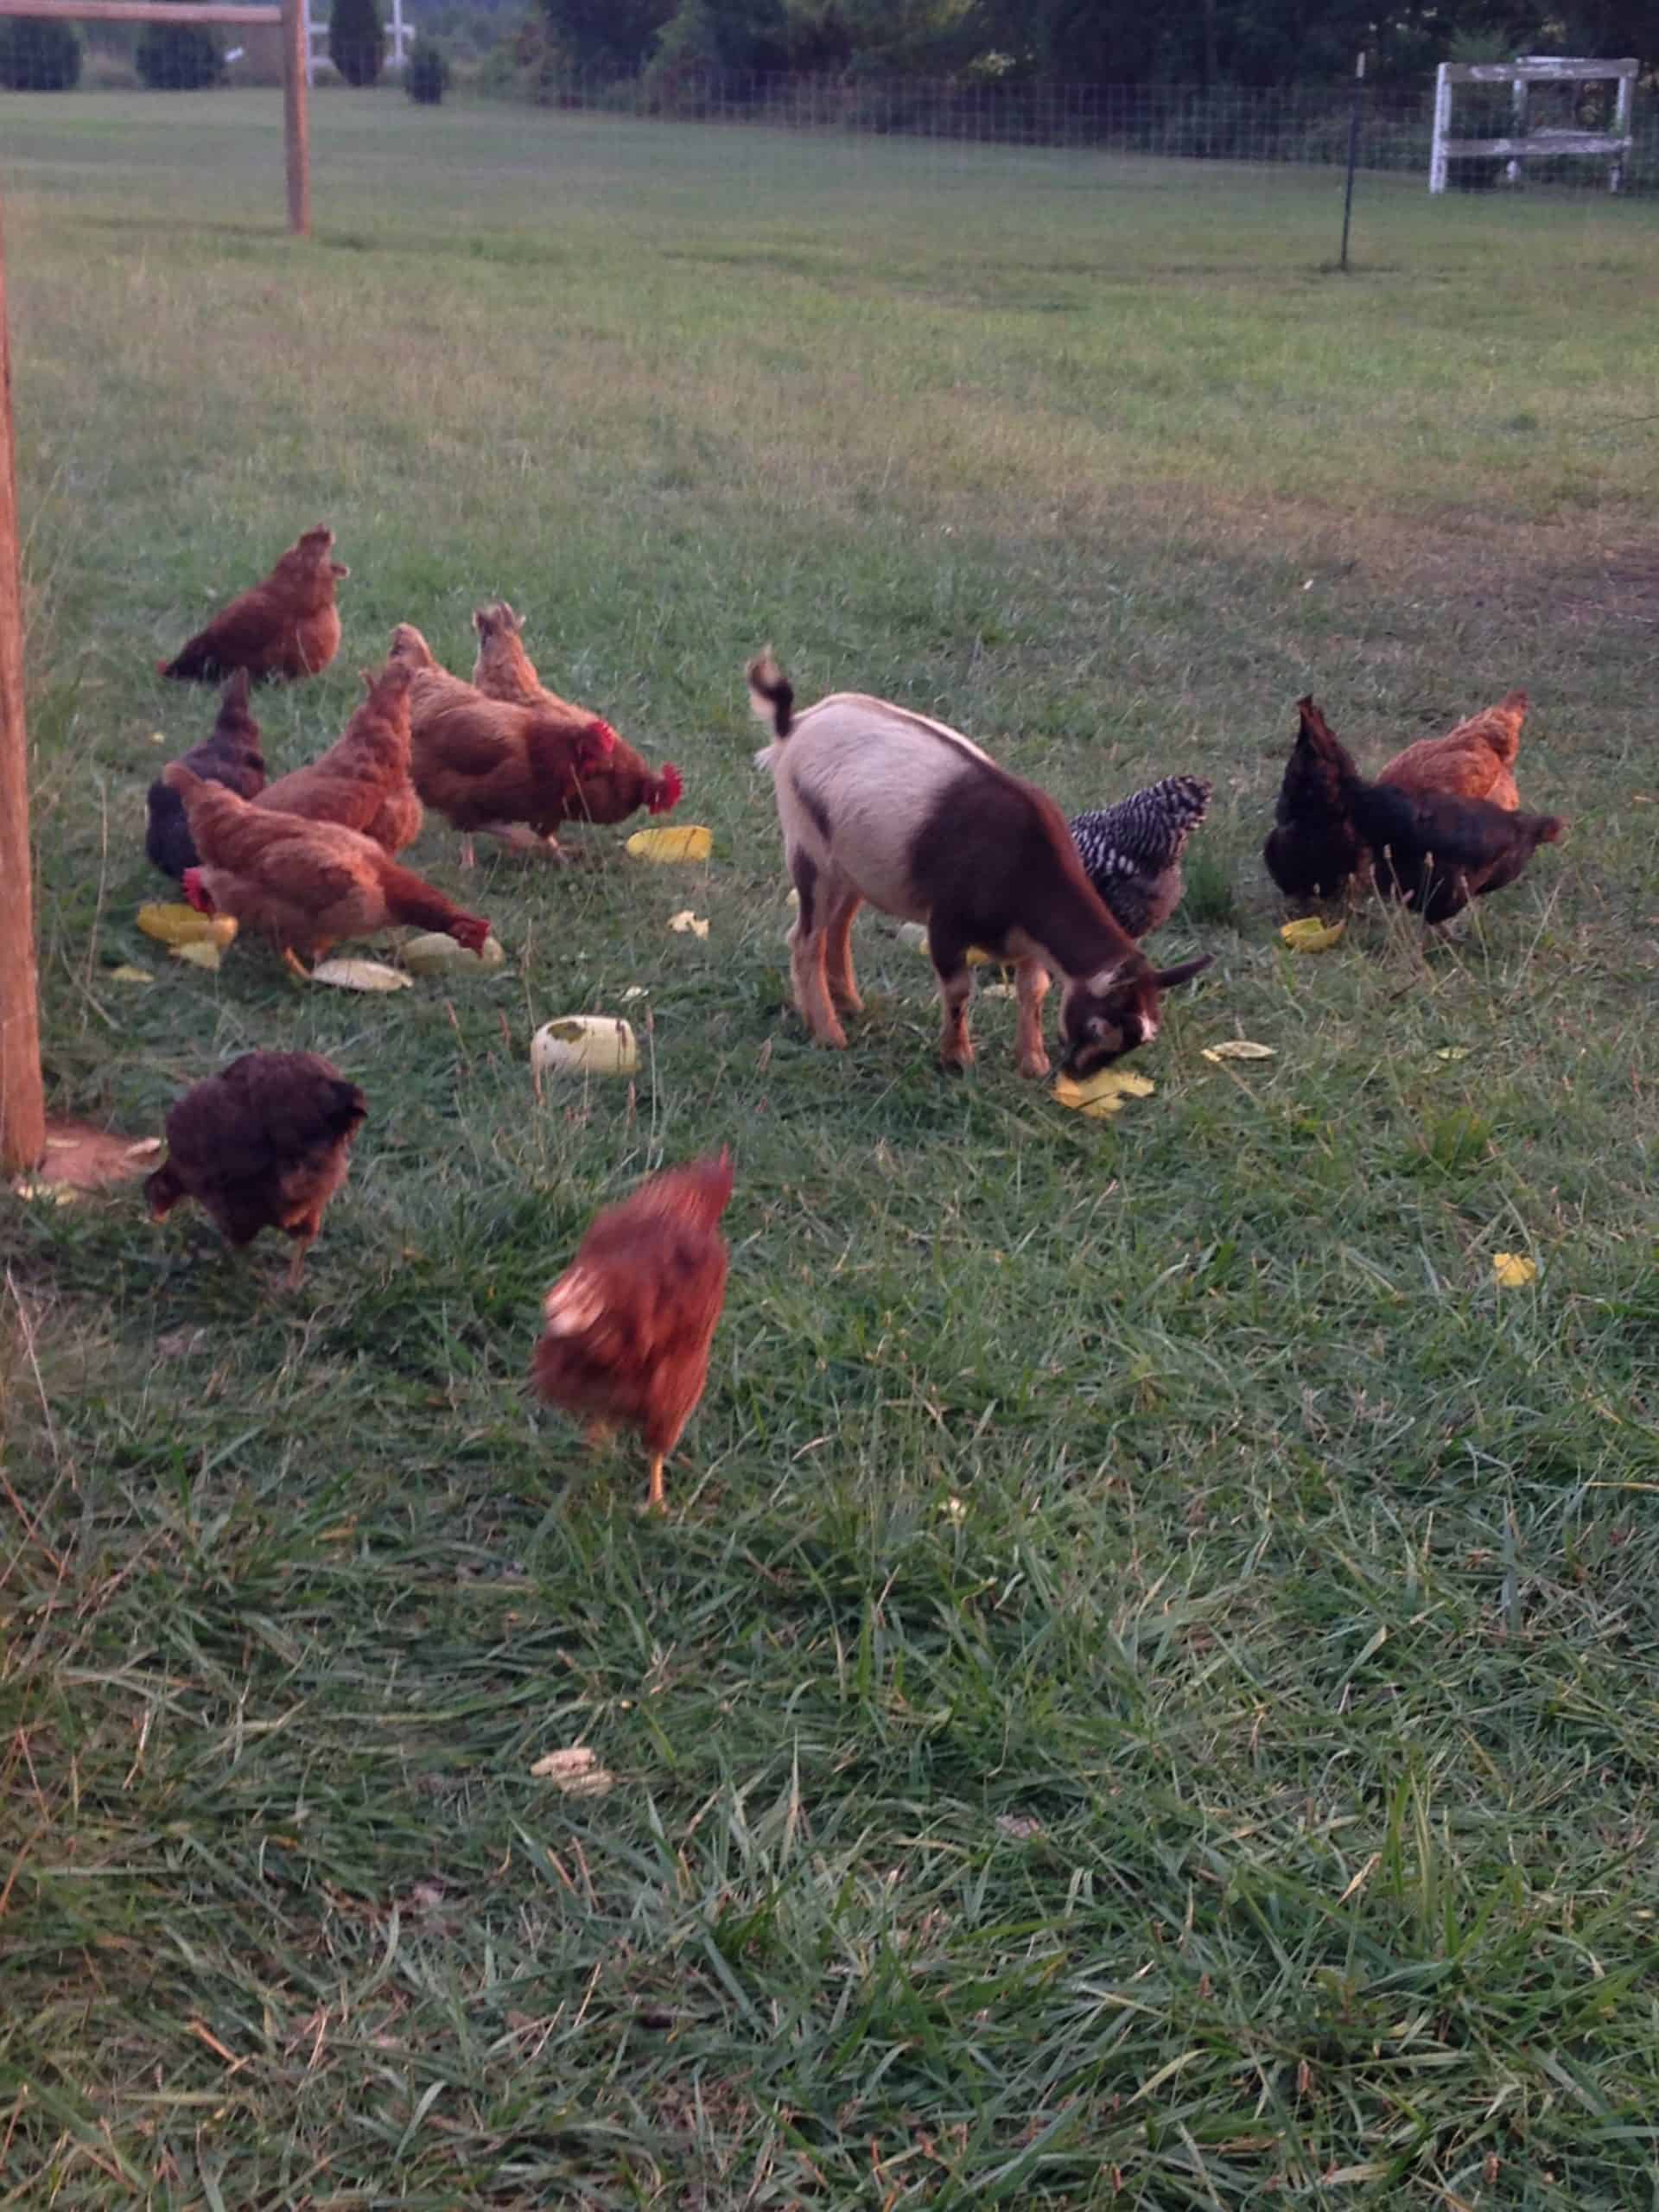 Chloe, the goat, and several chickens enjoy yellow squash